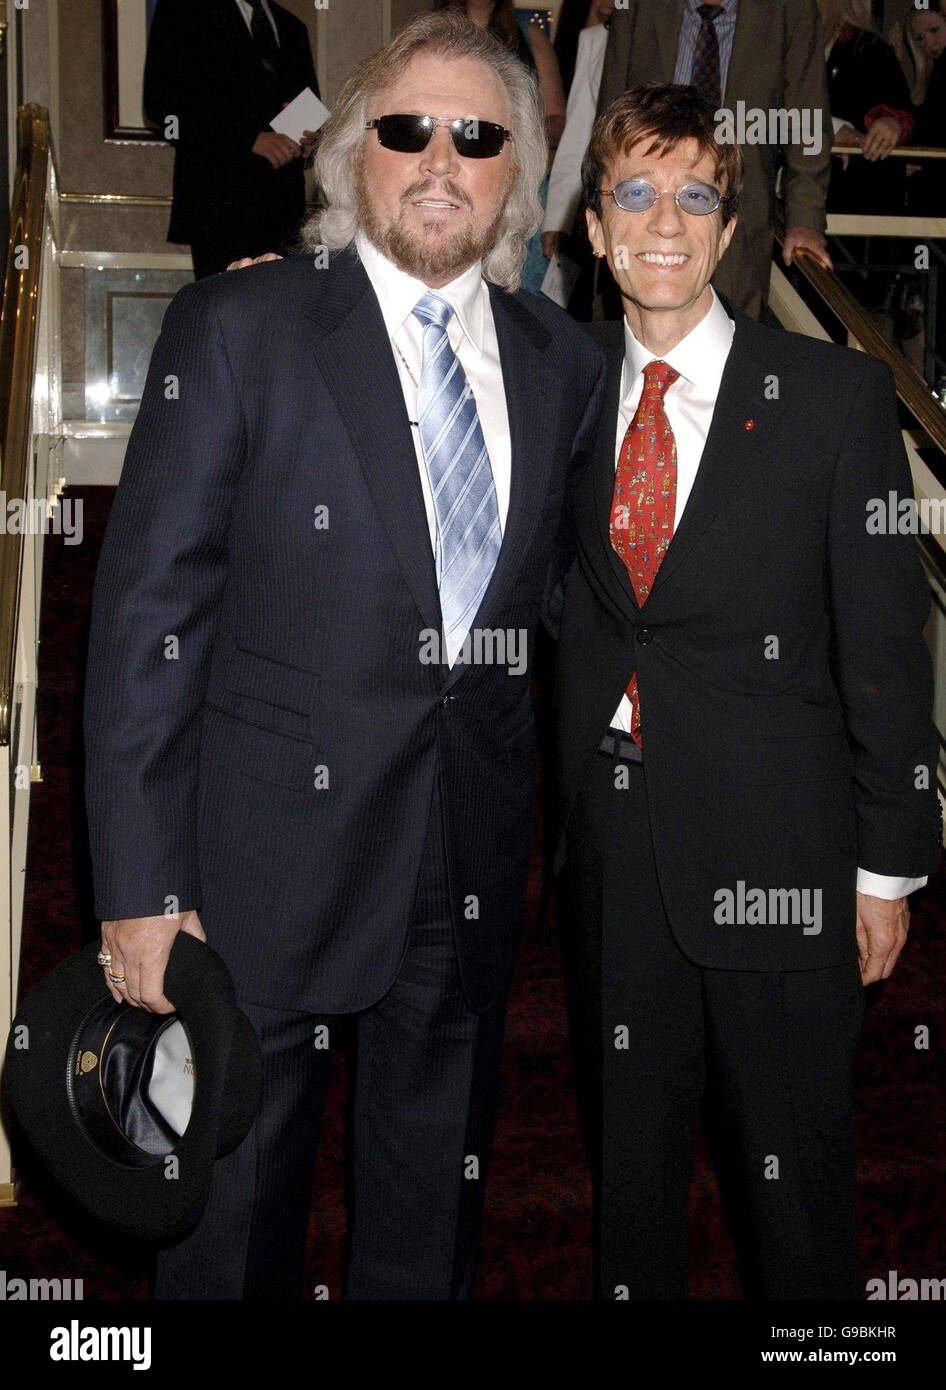 Barry Gibb (left) and Robin Gibb of the Bee Gees arrive for the 51st Ivor Novello Awards, at the Grosvenor Hotel, central London. Stock Photo